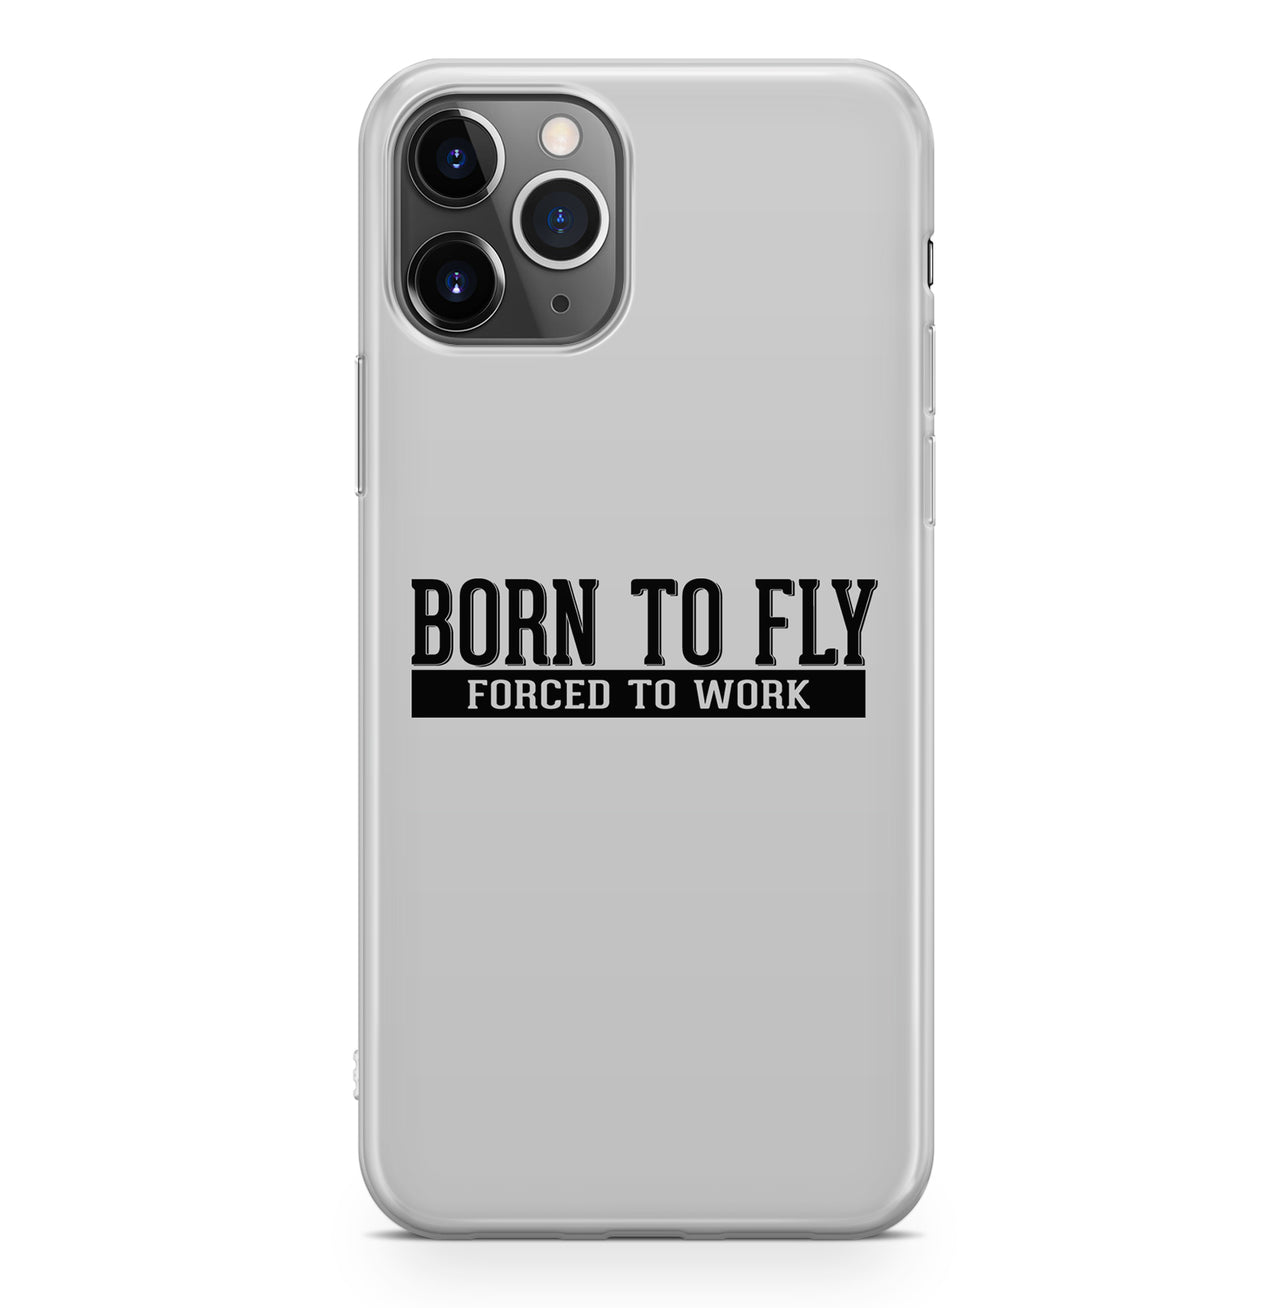 Born To Fly Forced To Work Designed iPhone Cases